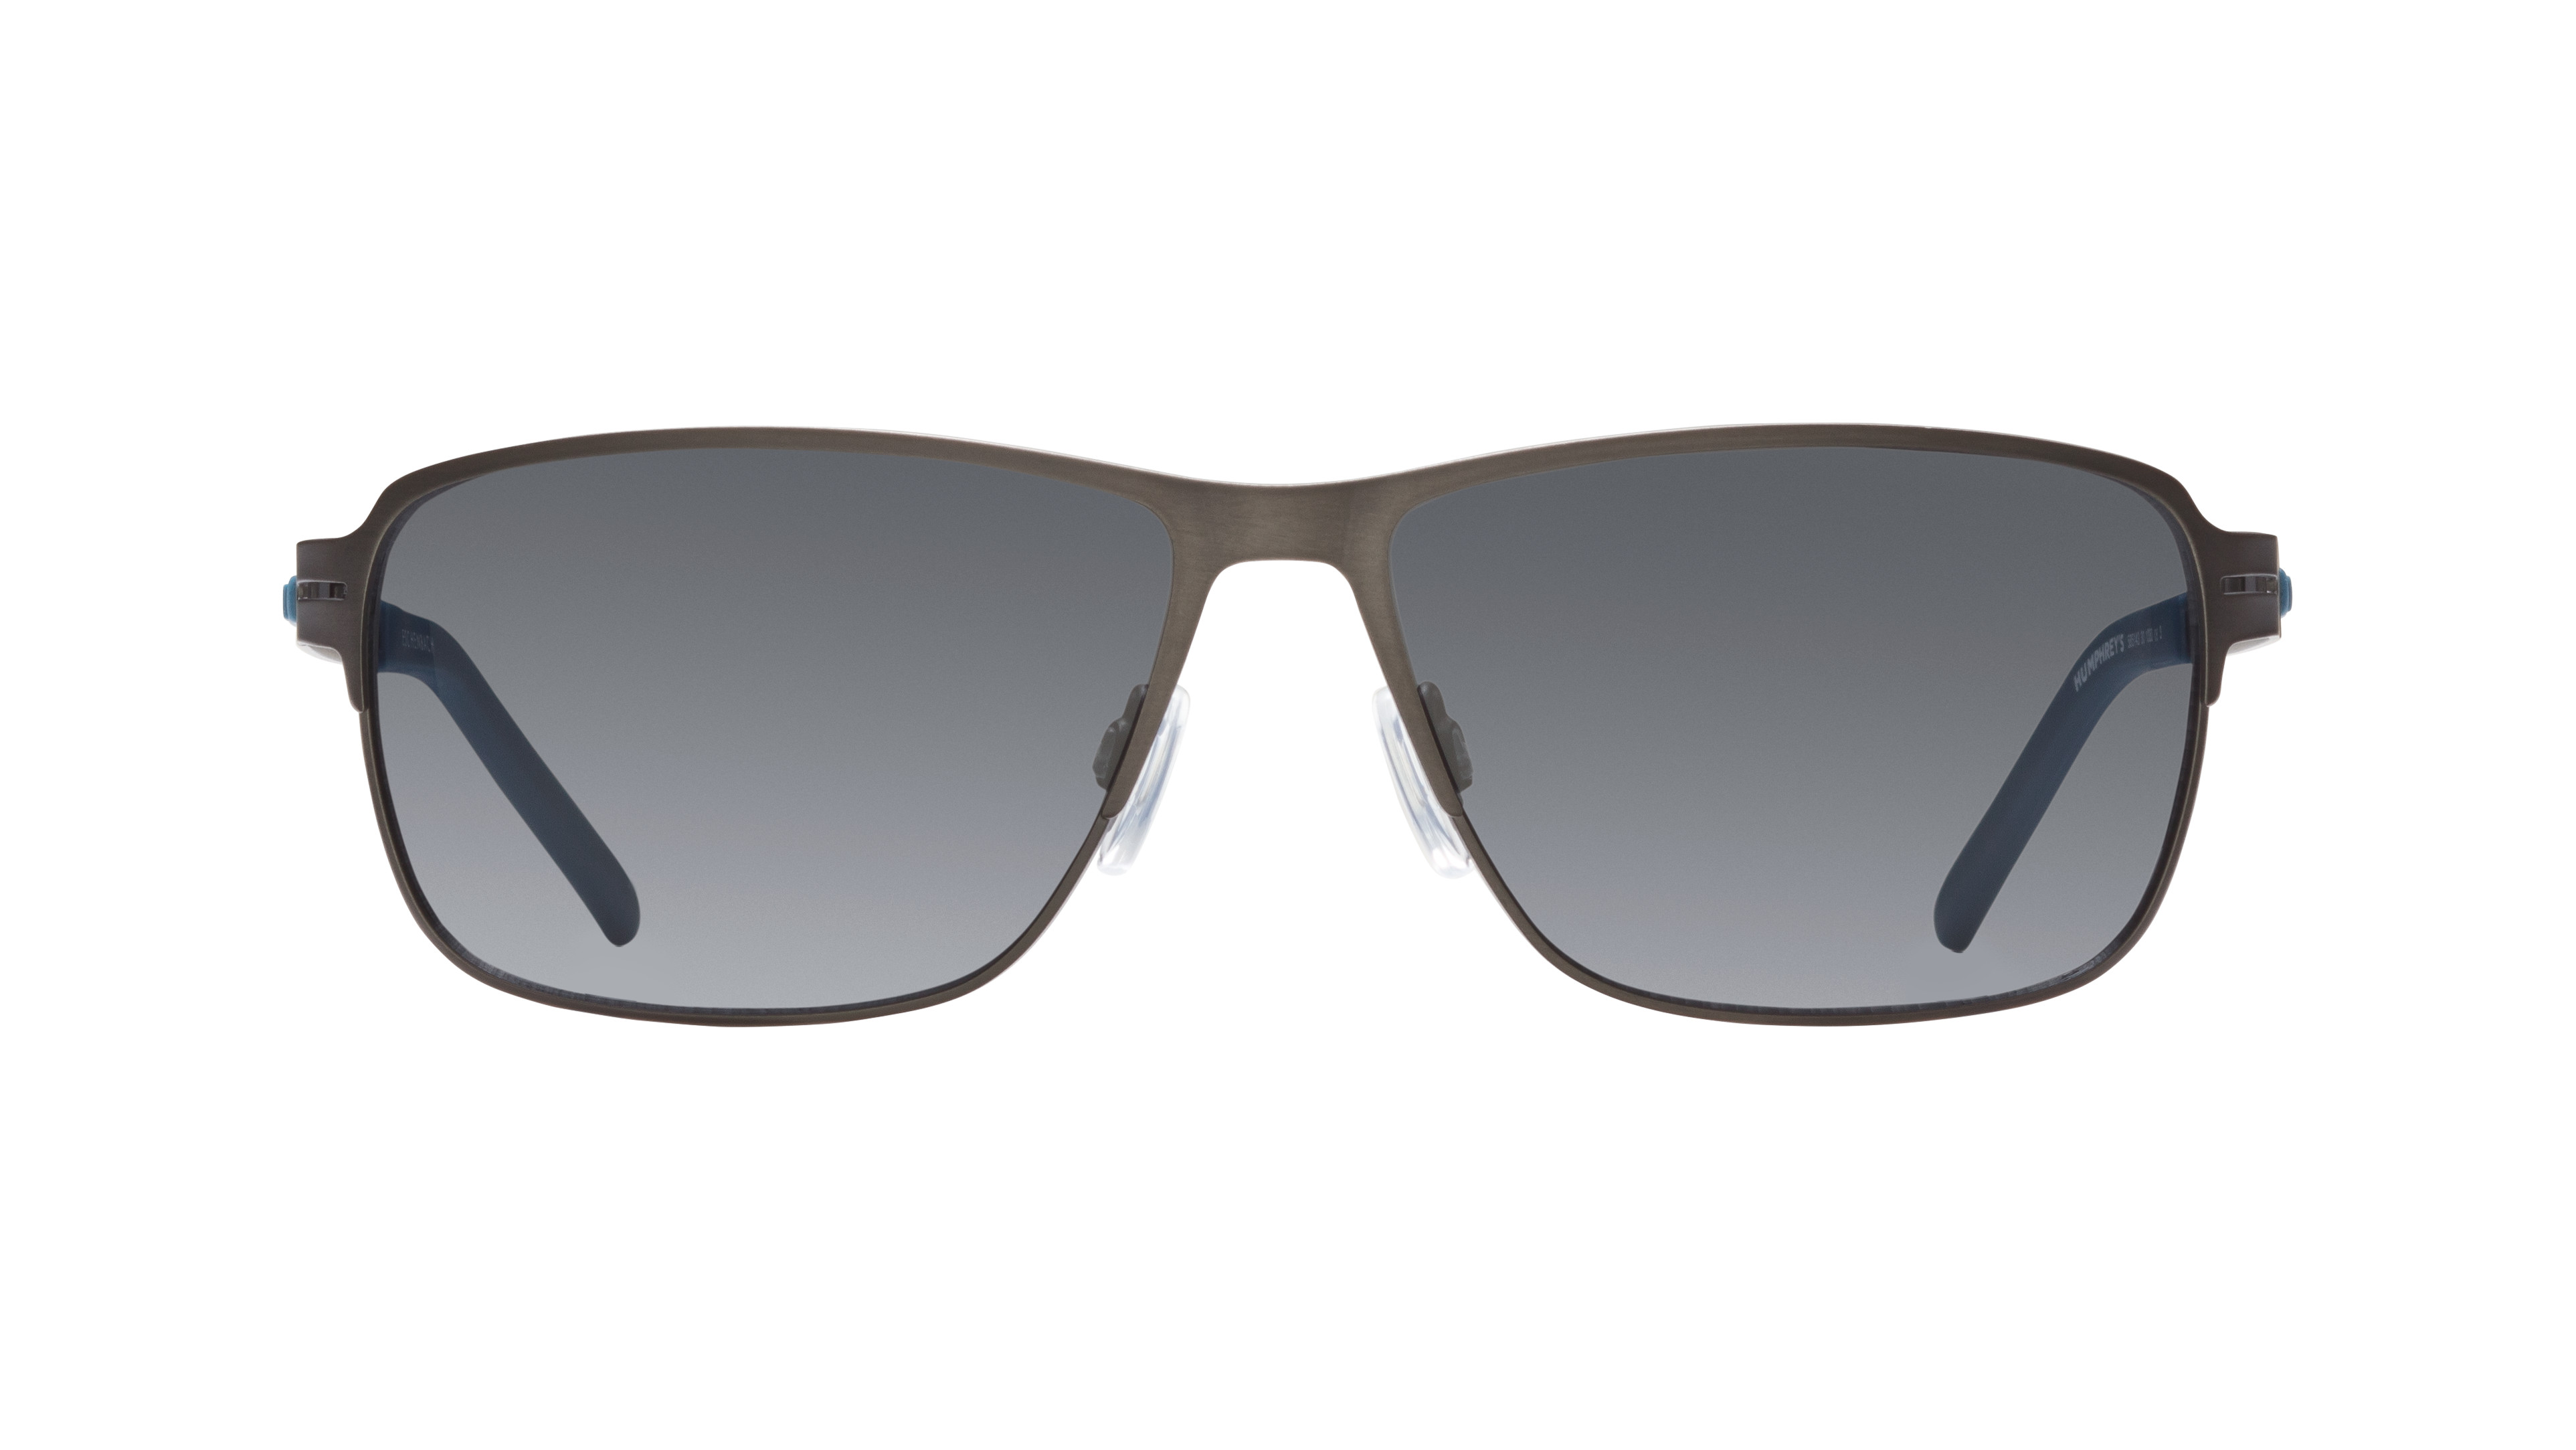 [products.image.front] HUMPHREY´S eyewear 585143 30 1030 Sonnenbrille